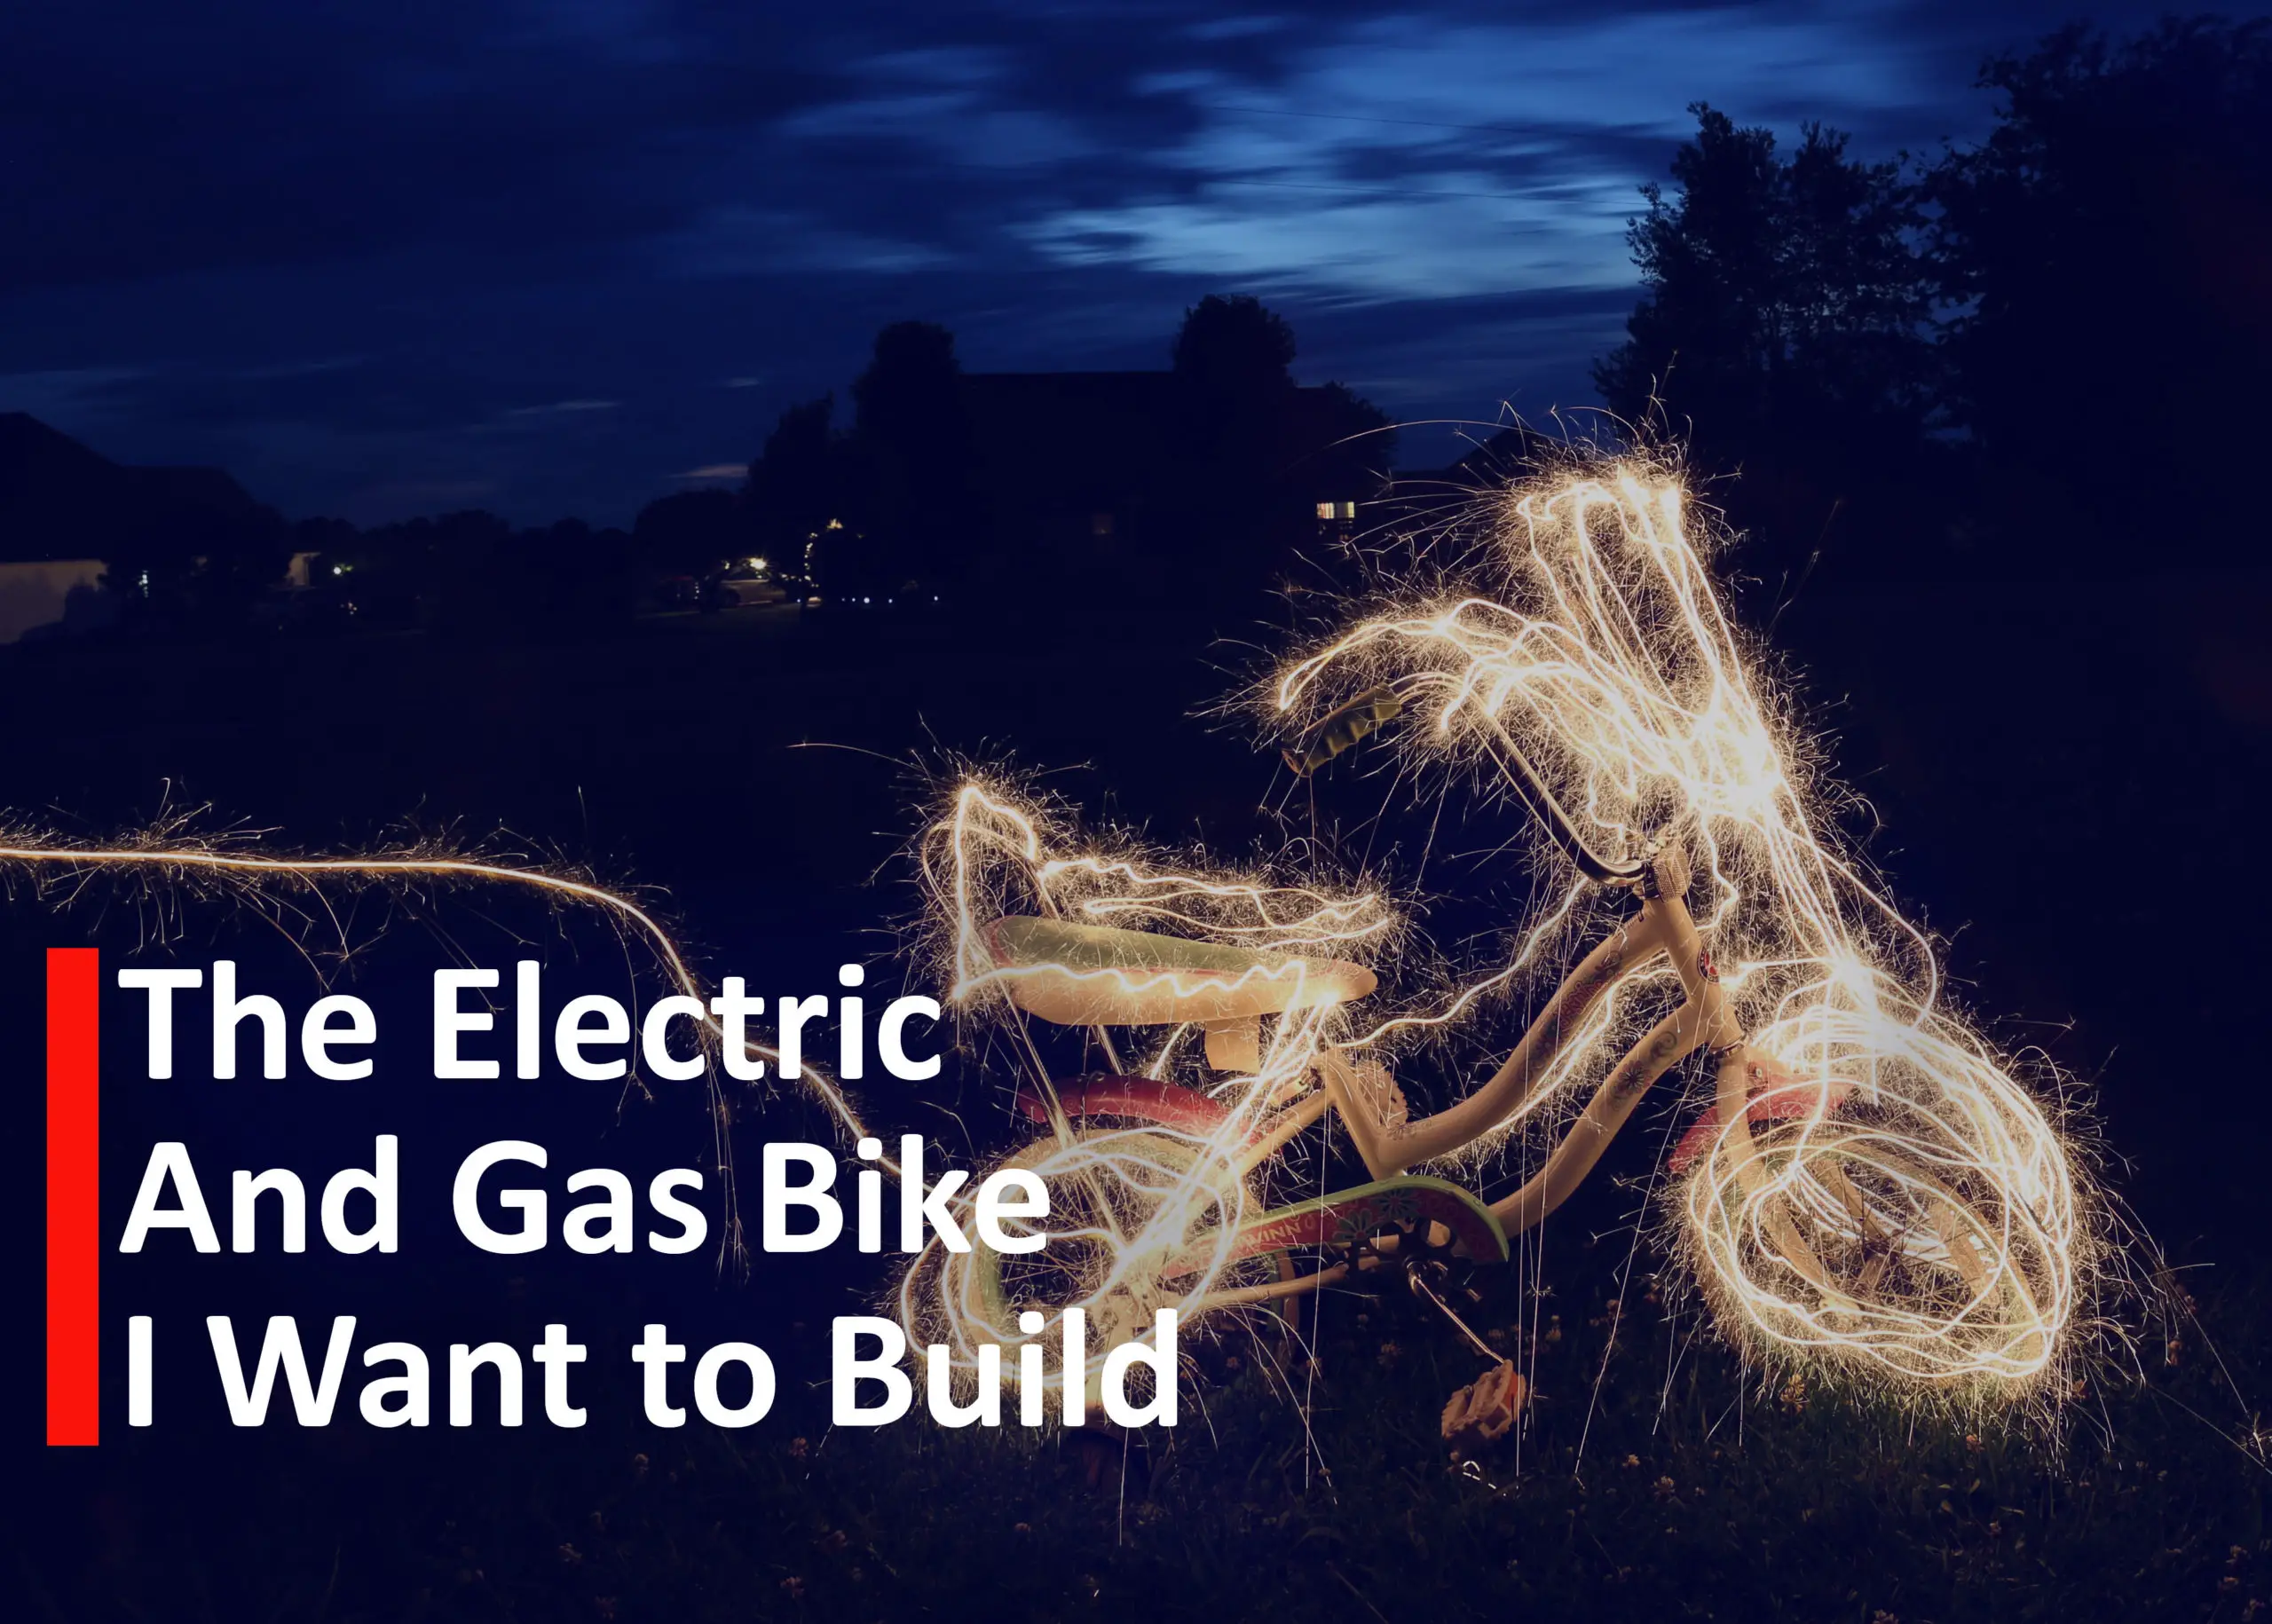 the-electric-and-gas-bike-i-want-to-build-apocalyptic-prepping